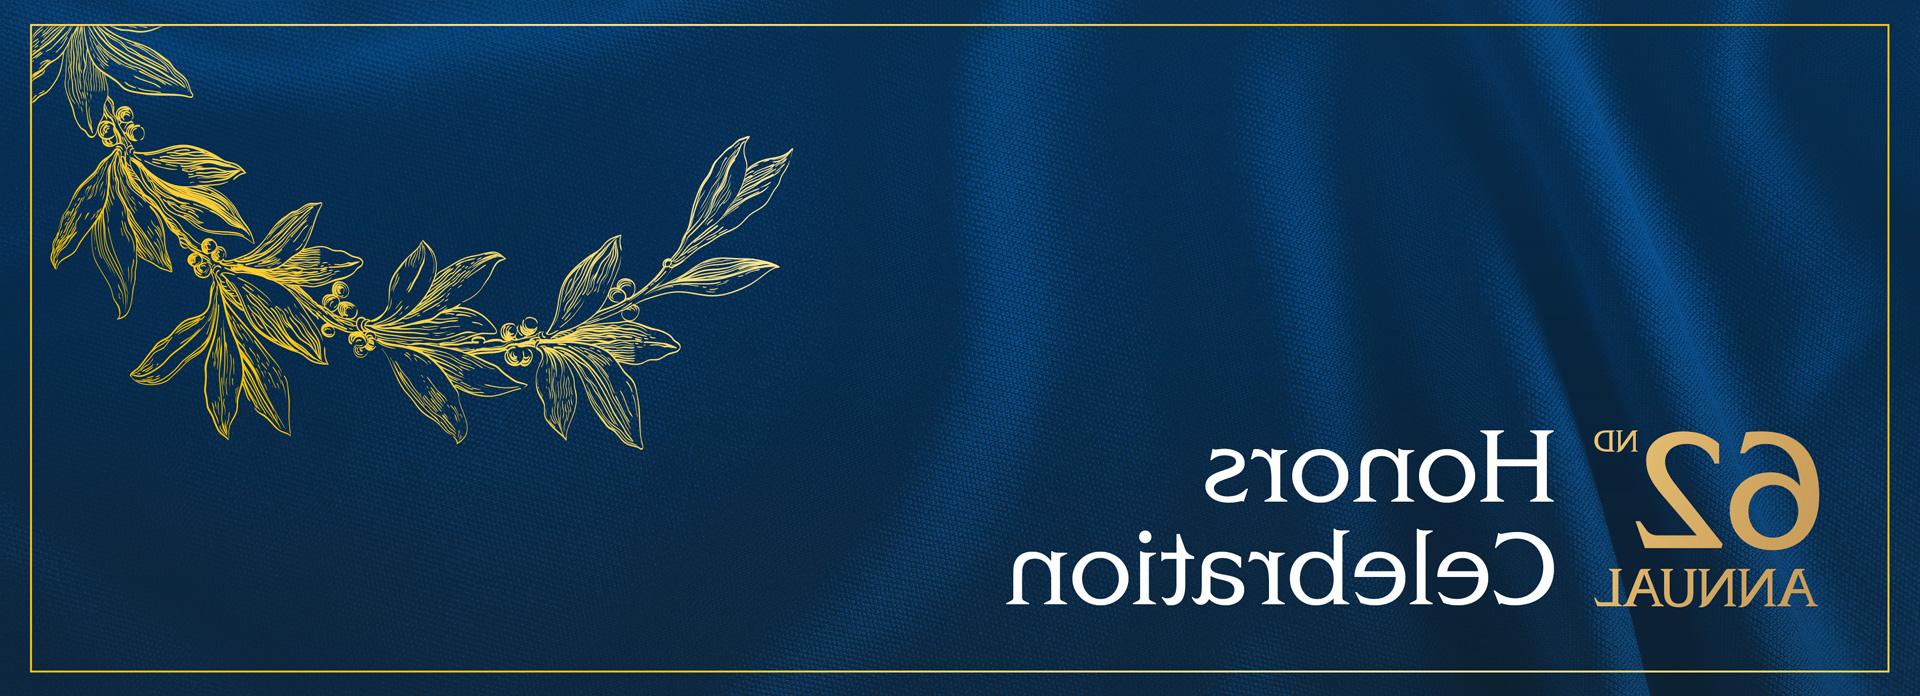 62nd Annual Honors Celebration over a blue cloth with gold branch of leaves.